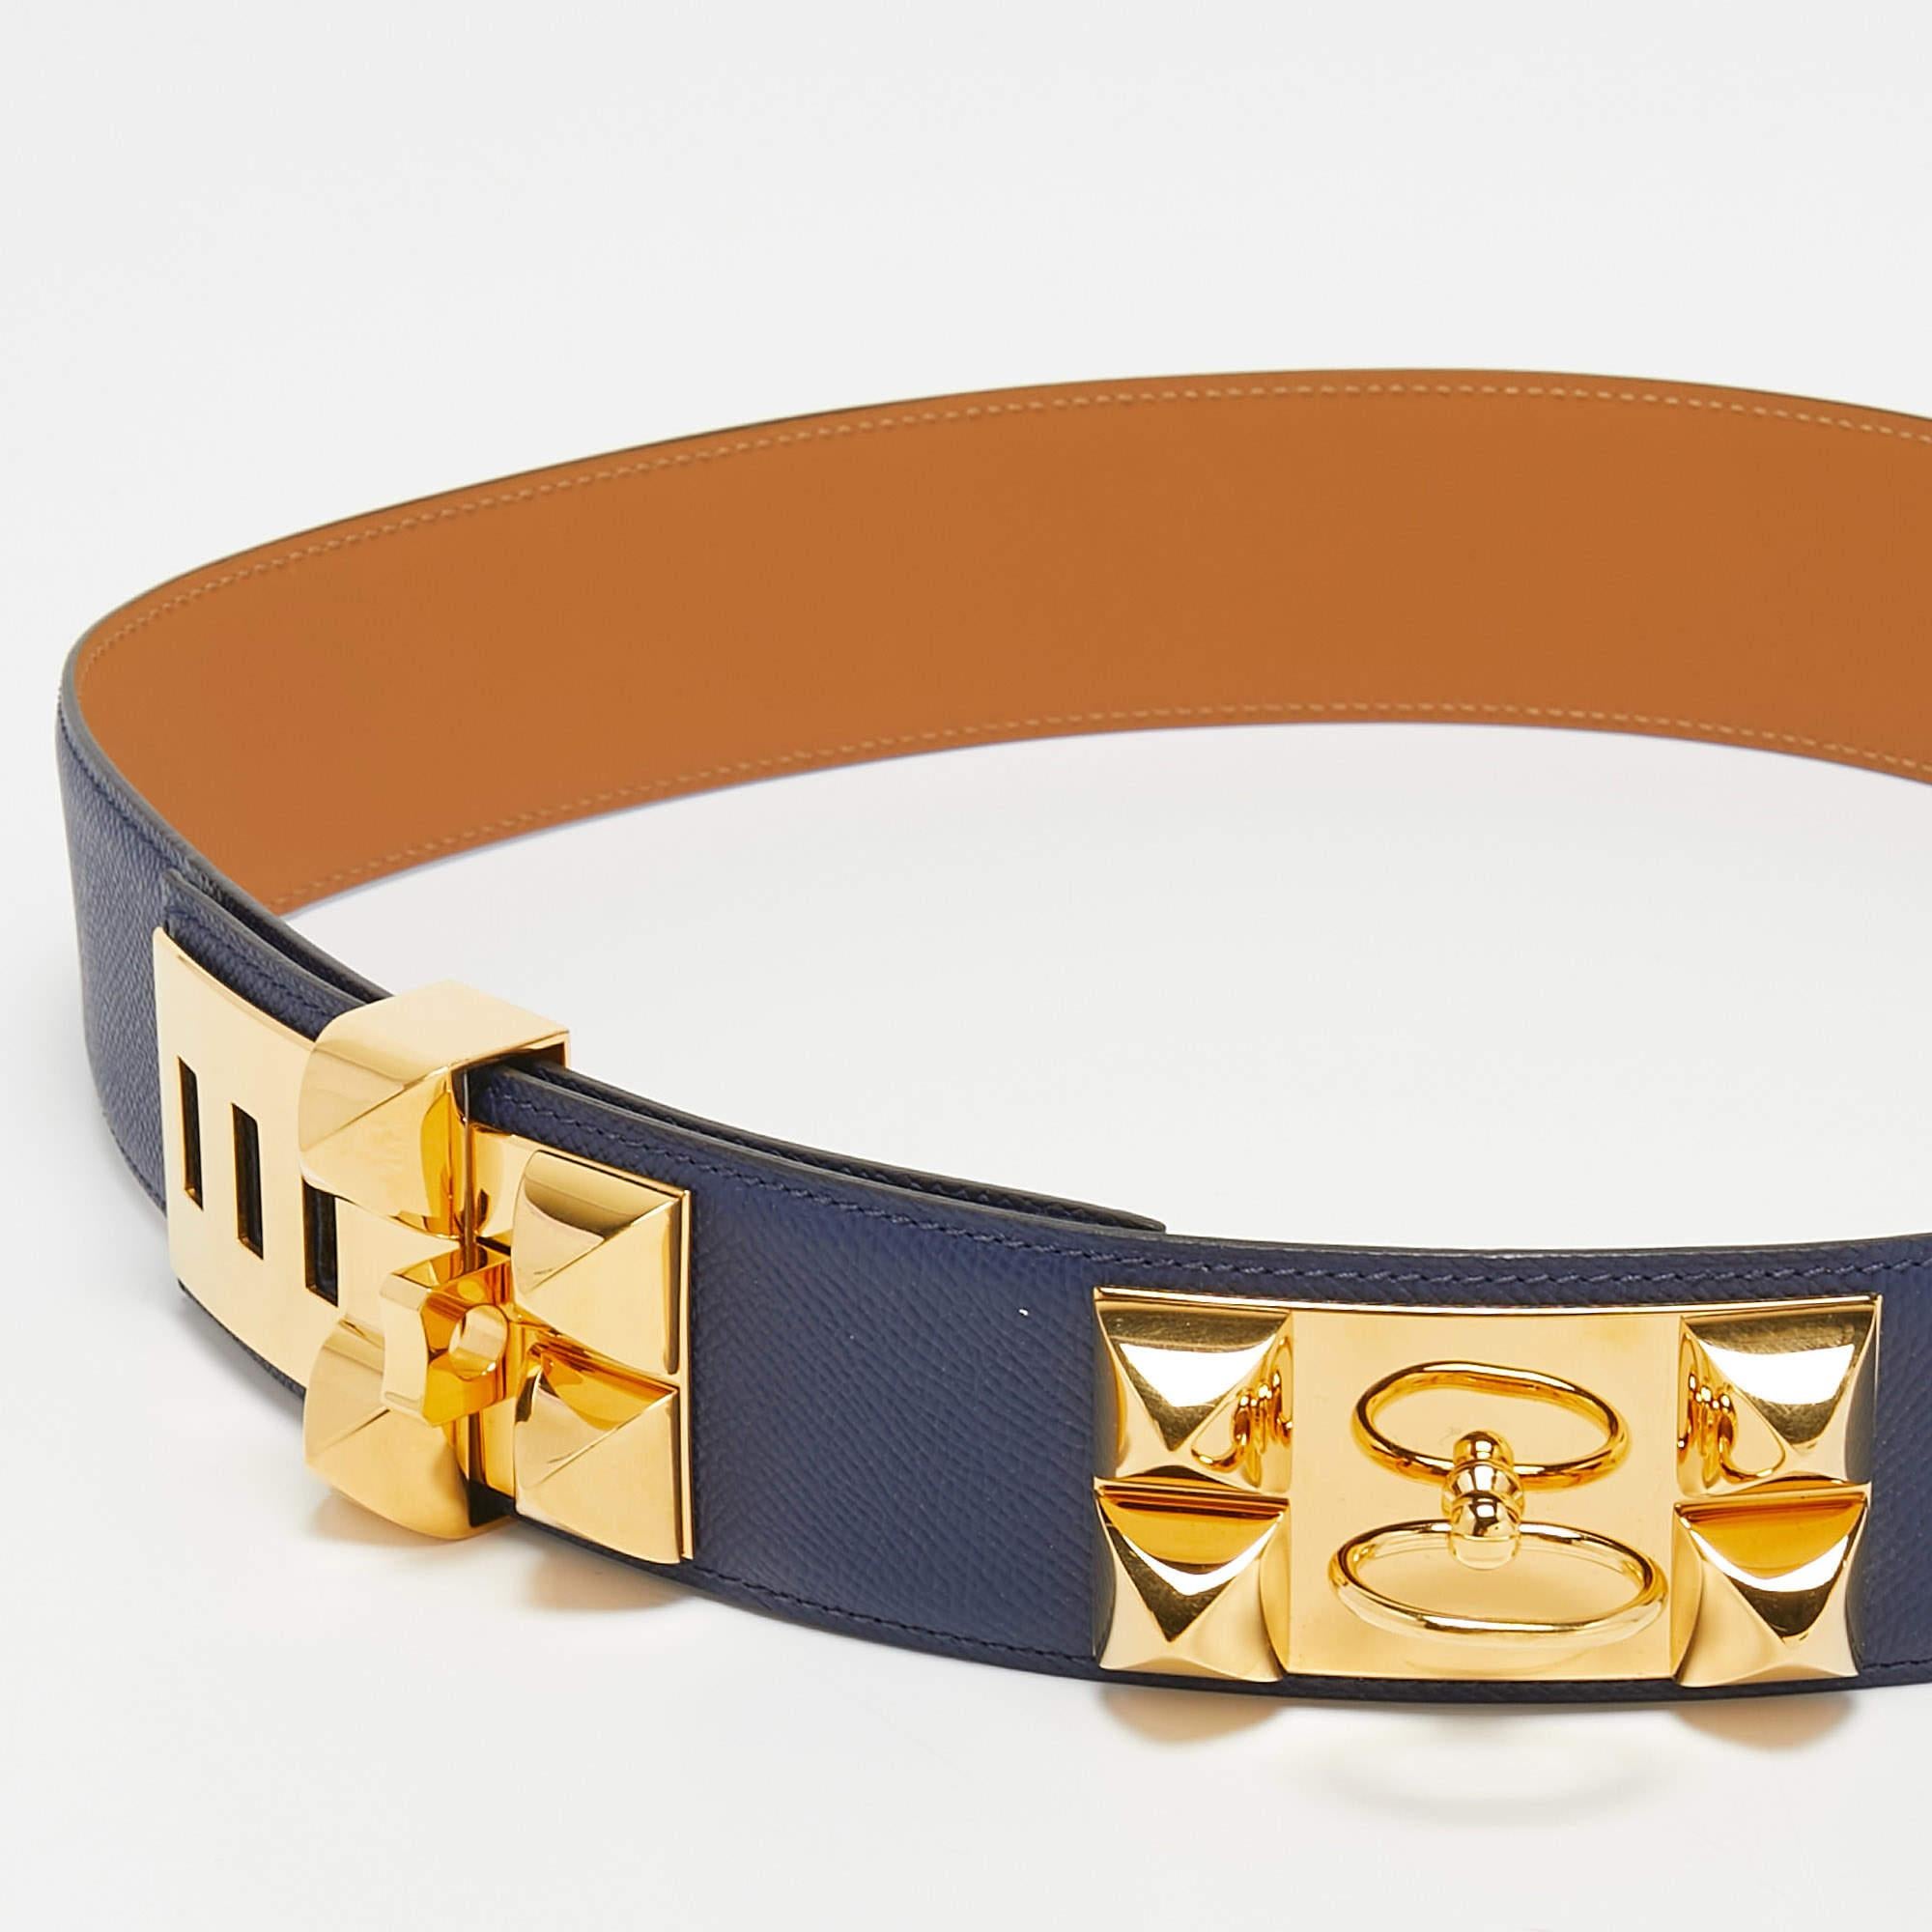 The Hermes Collier De Chien belt is a luxurious and iconic accessory. Made from high-quality Epsom leather, it features the distinctive Collier De Chien design with pyramid studs and a large buckle. This stylish belt adds a touch of sophistication